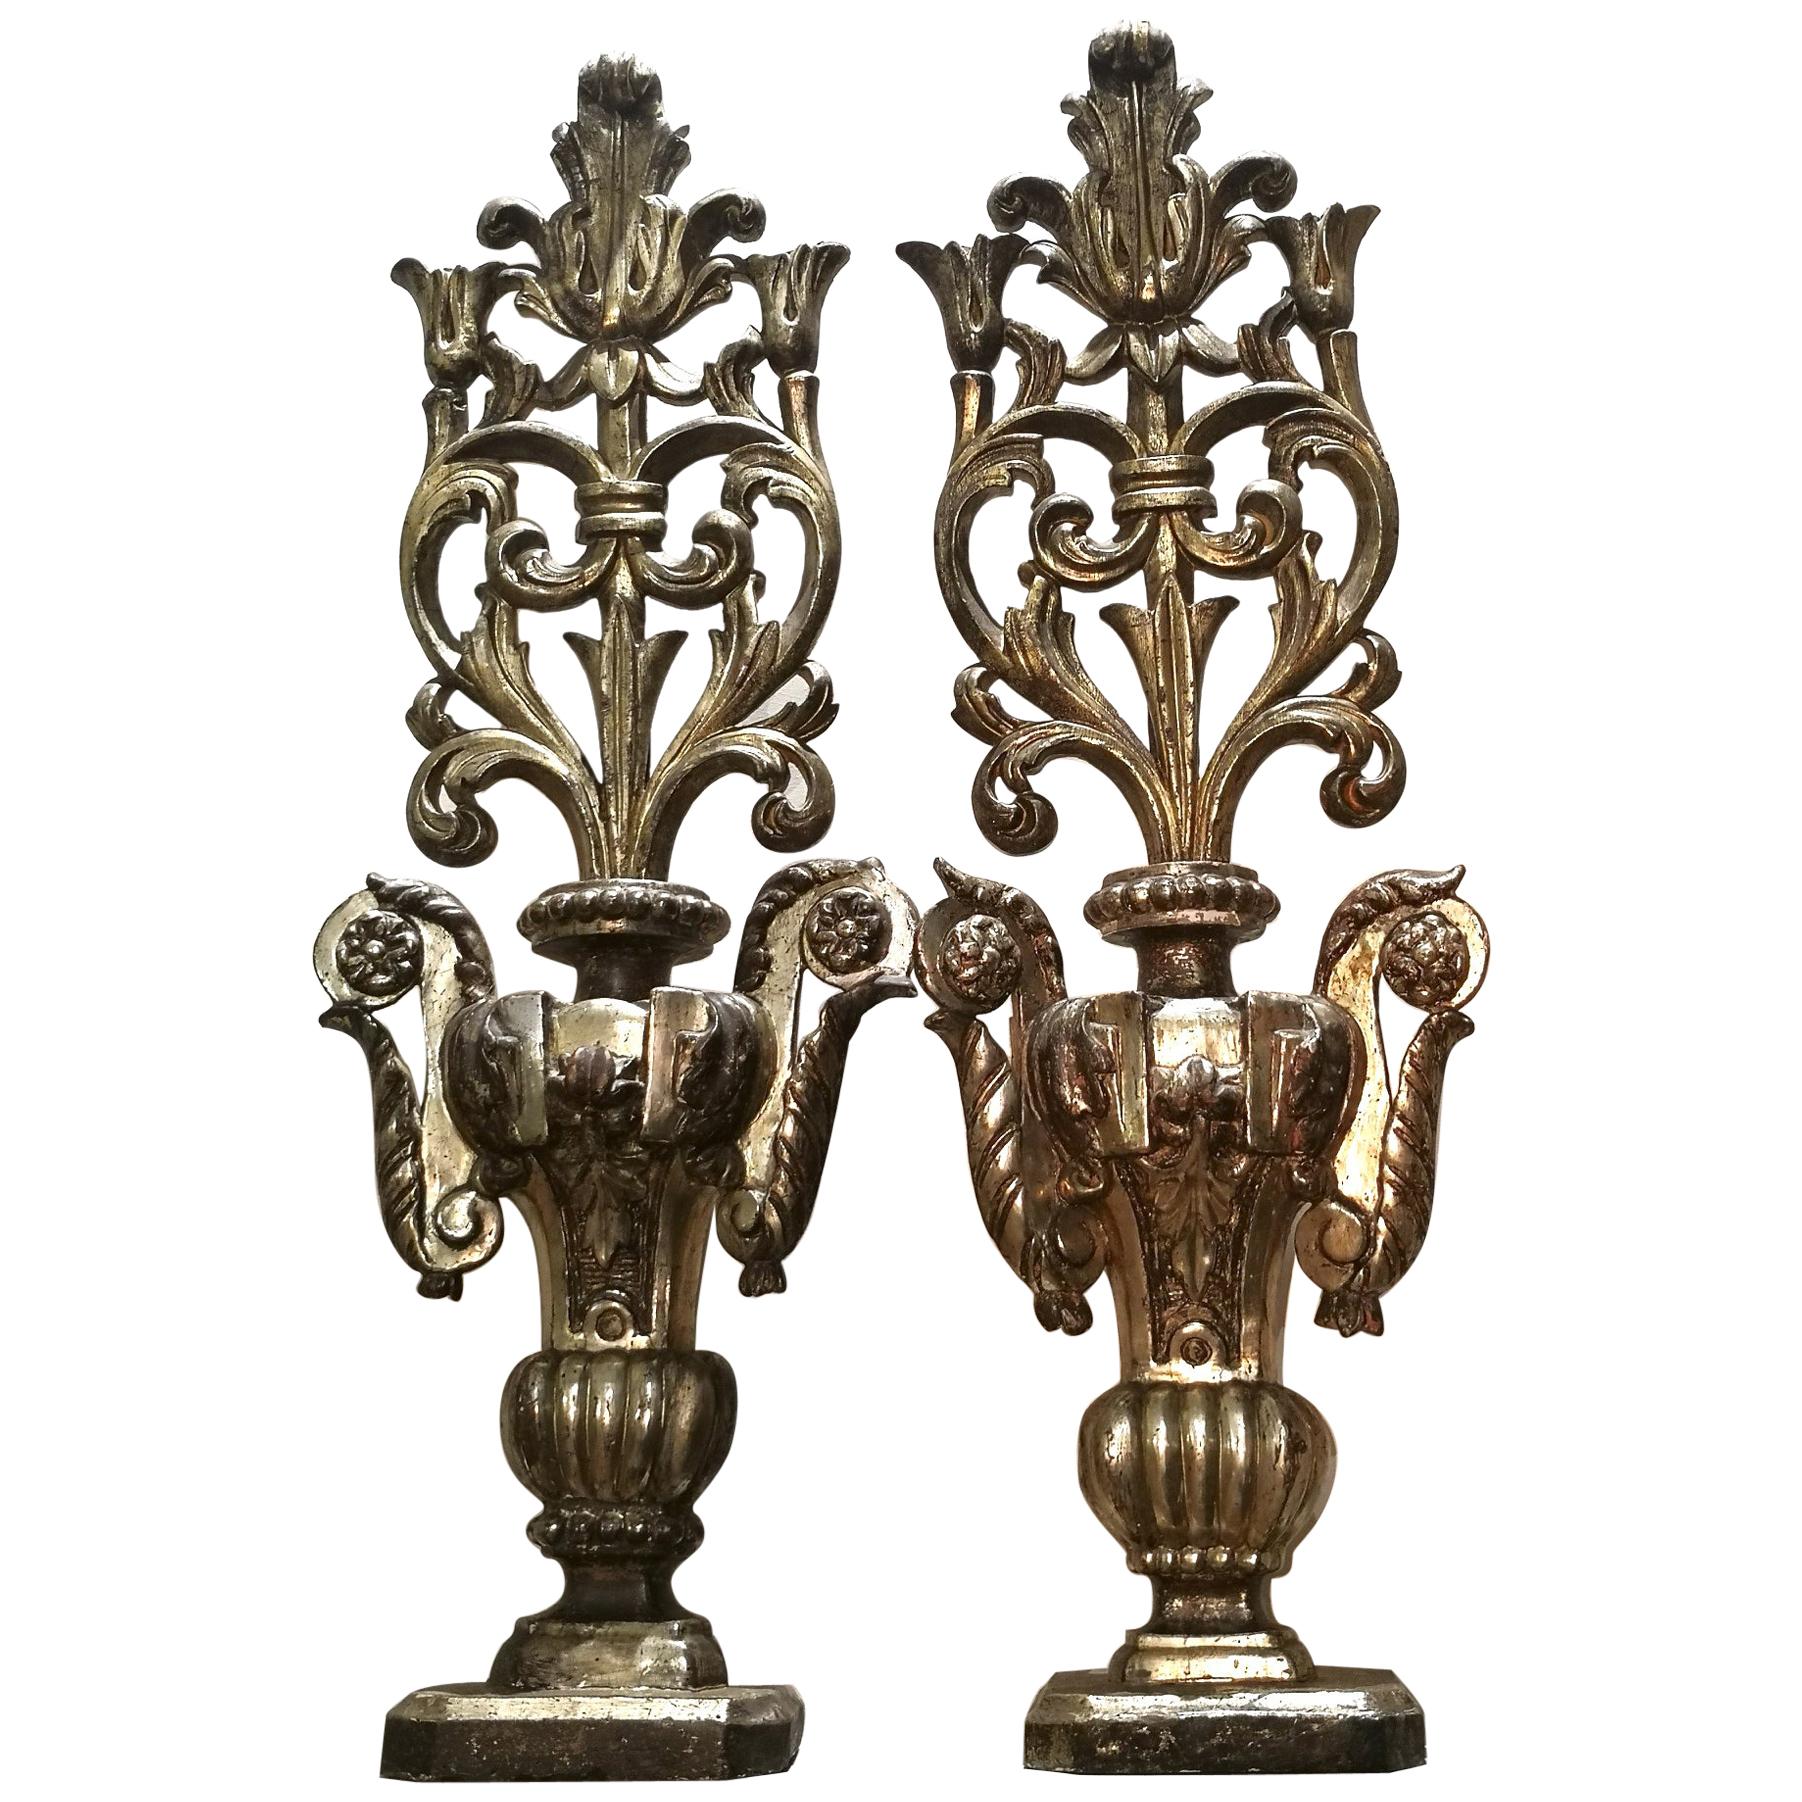 Pair of Large 18th Century Italian Carved Wood and Parcel-Gilt Altar Ornaments